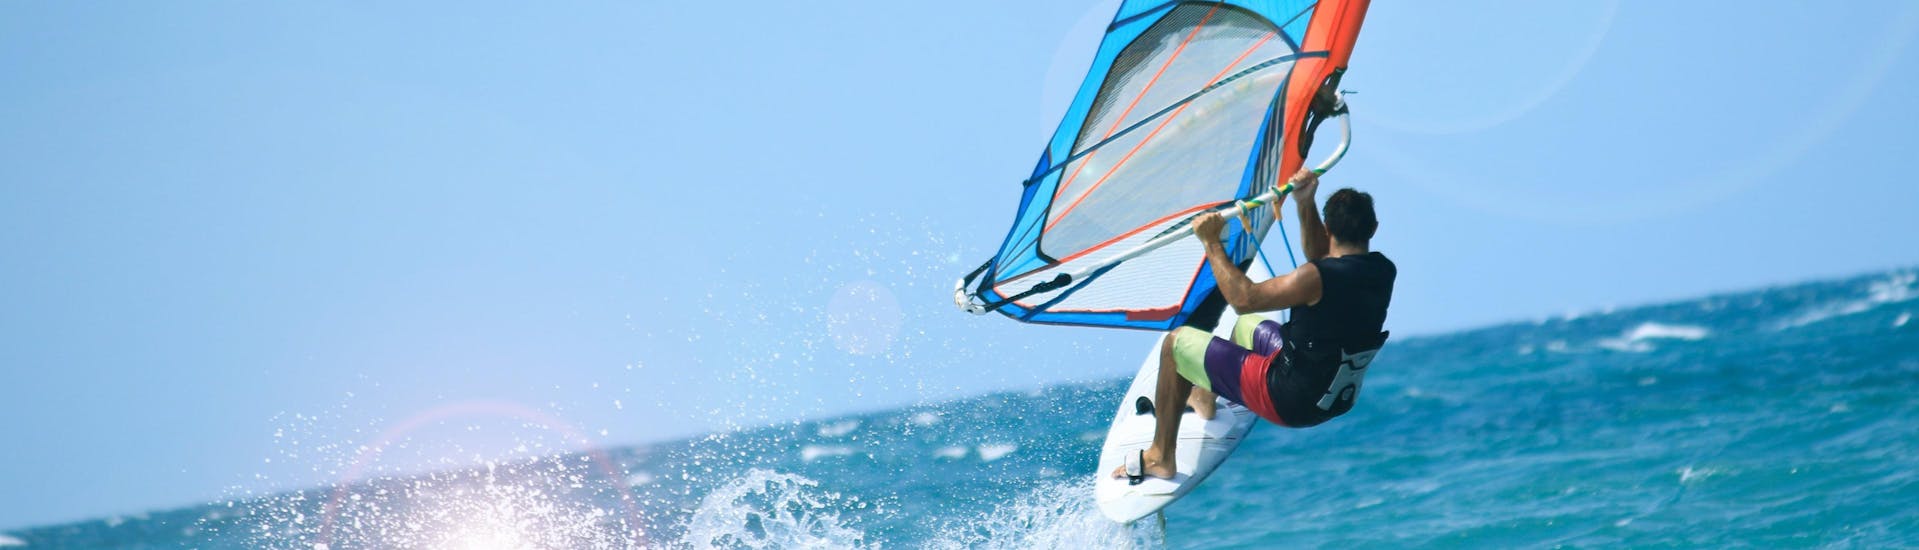 A young man windsurfing in the holiday destination of Alvor.